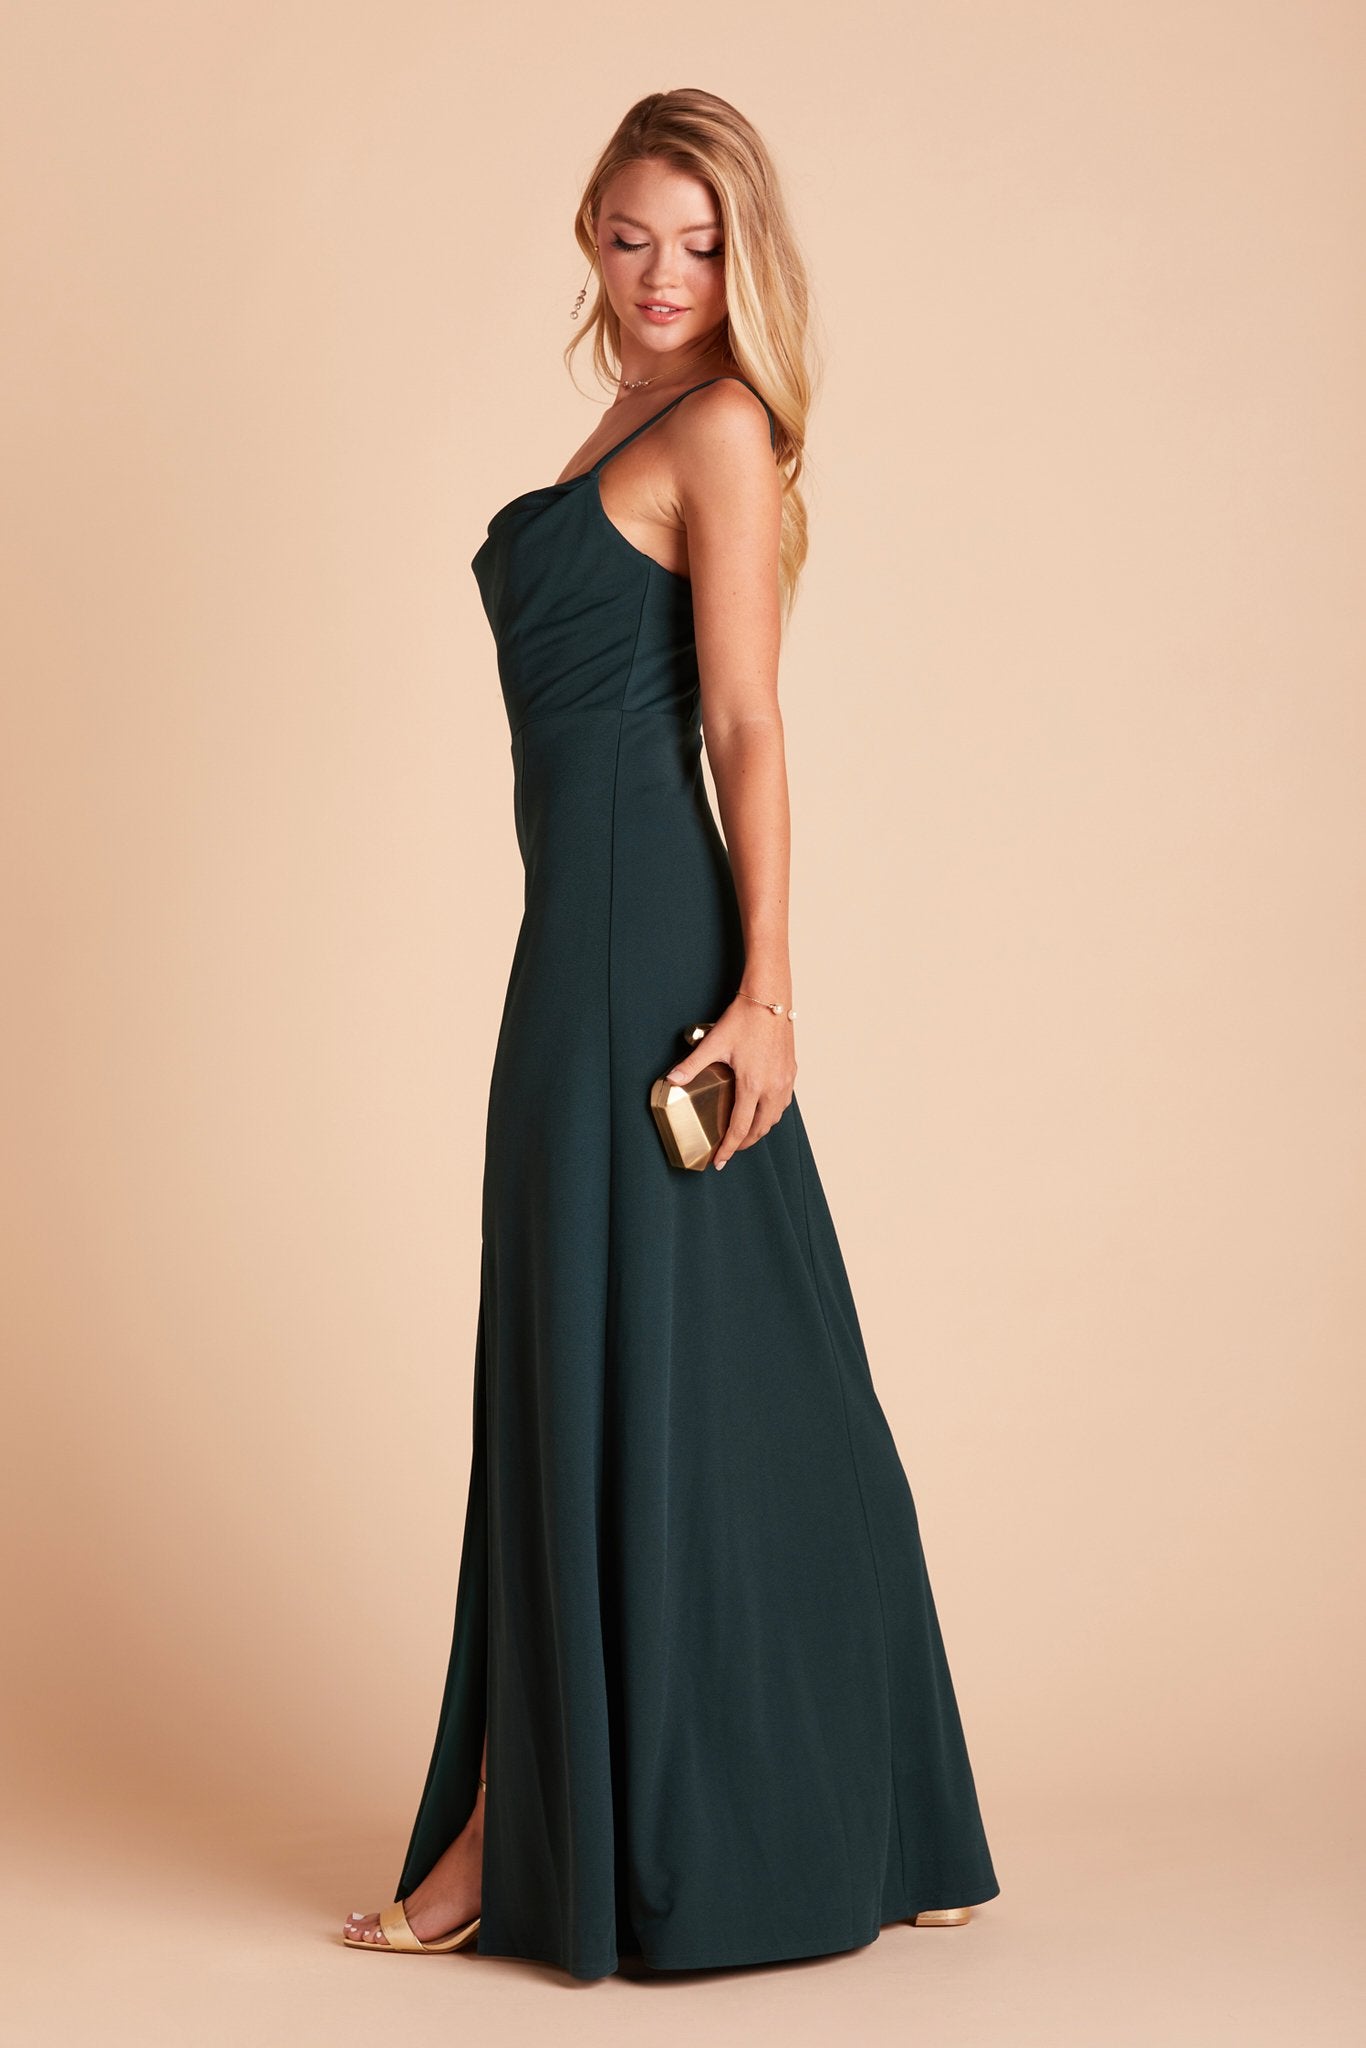 Side view of the Ash Bridesmaid Dress in emerald crepe shows a slender silhouette with a fitted bust and waist and flowing skirt.